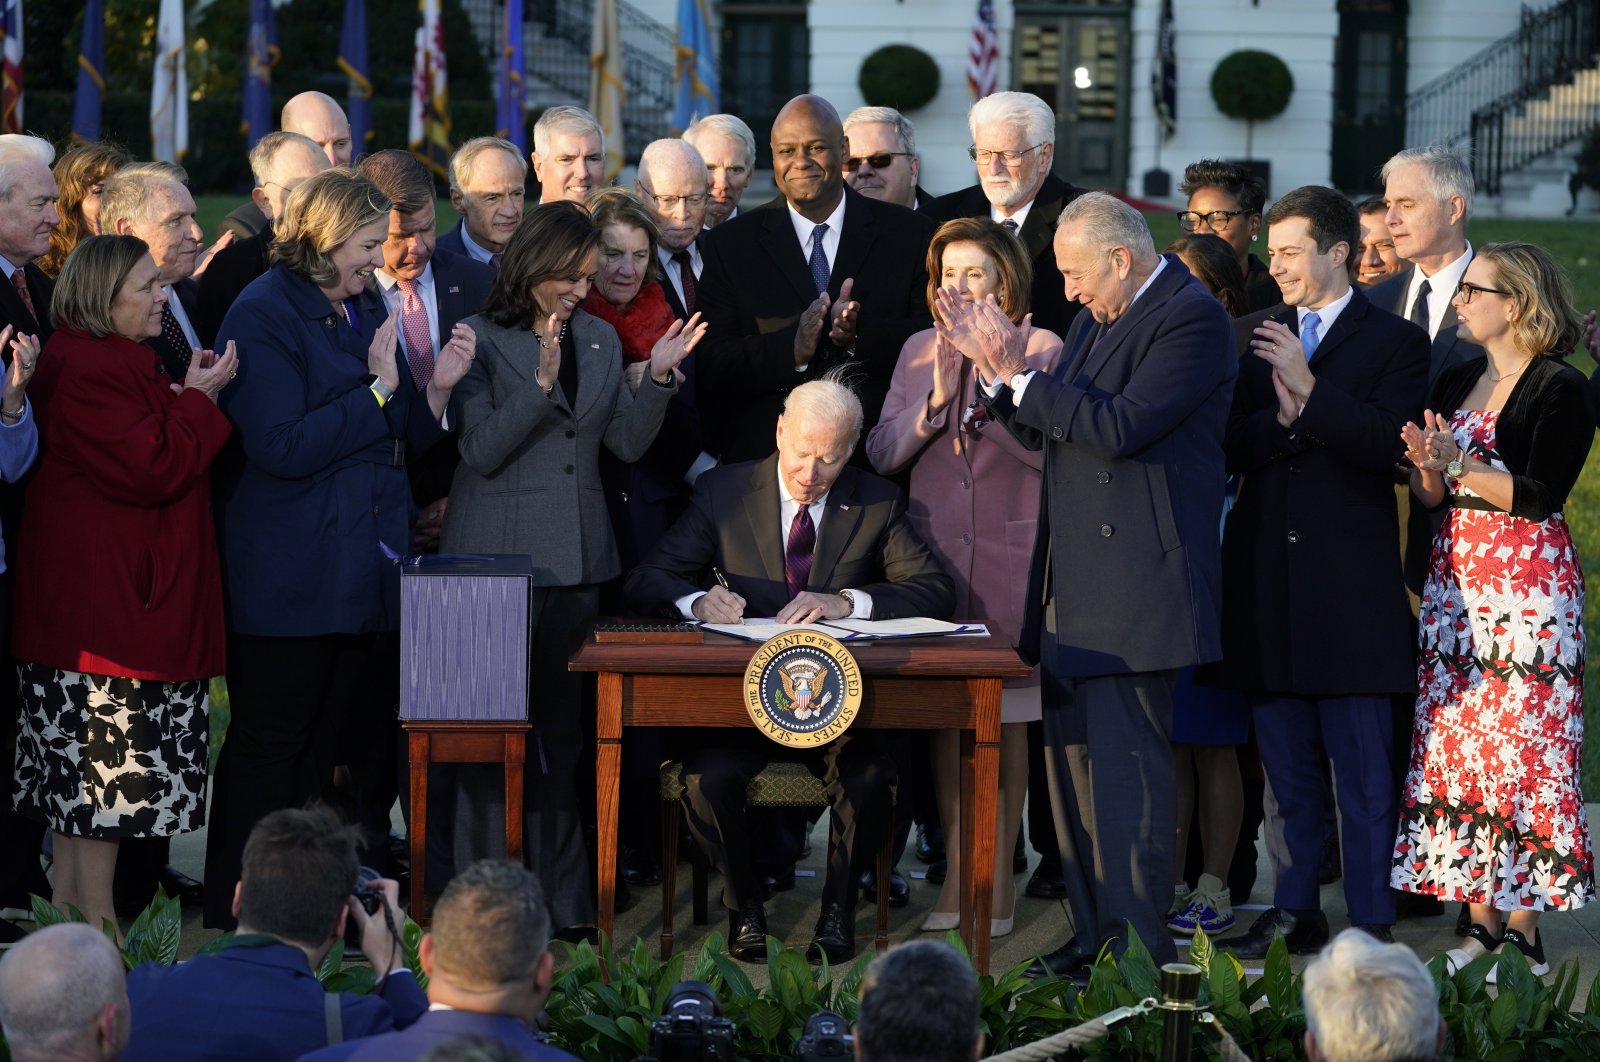 U.S. President Joe Biden signs the "Infrastructure Investment and Jobs Act" during an event on the South Lawn of the White House, in Washington, U.S., Nov. 15, 2021. (AP Photo)